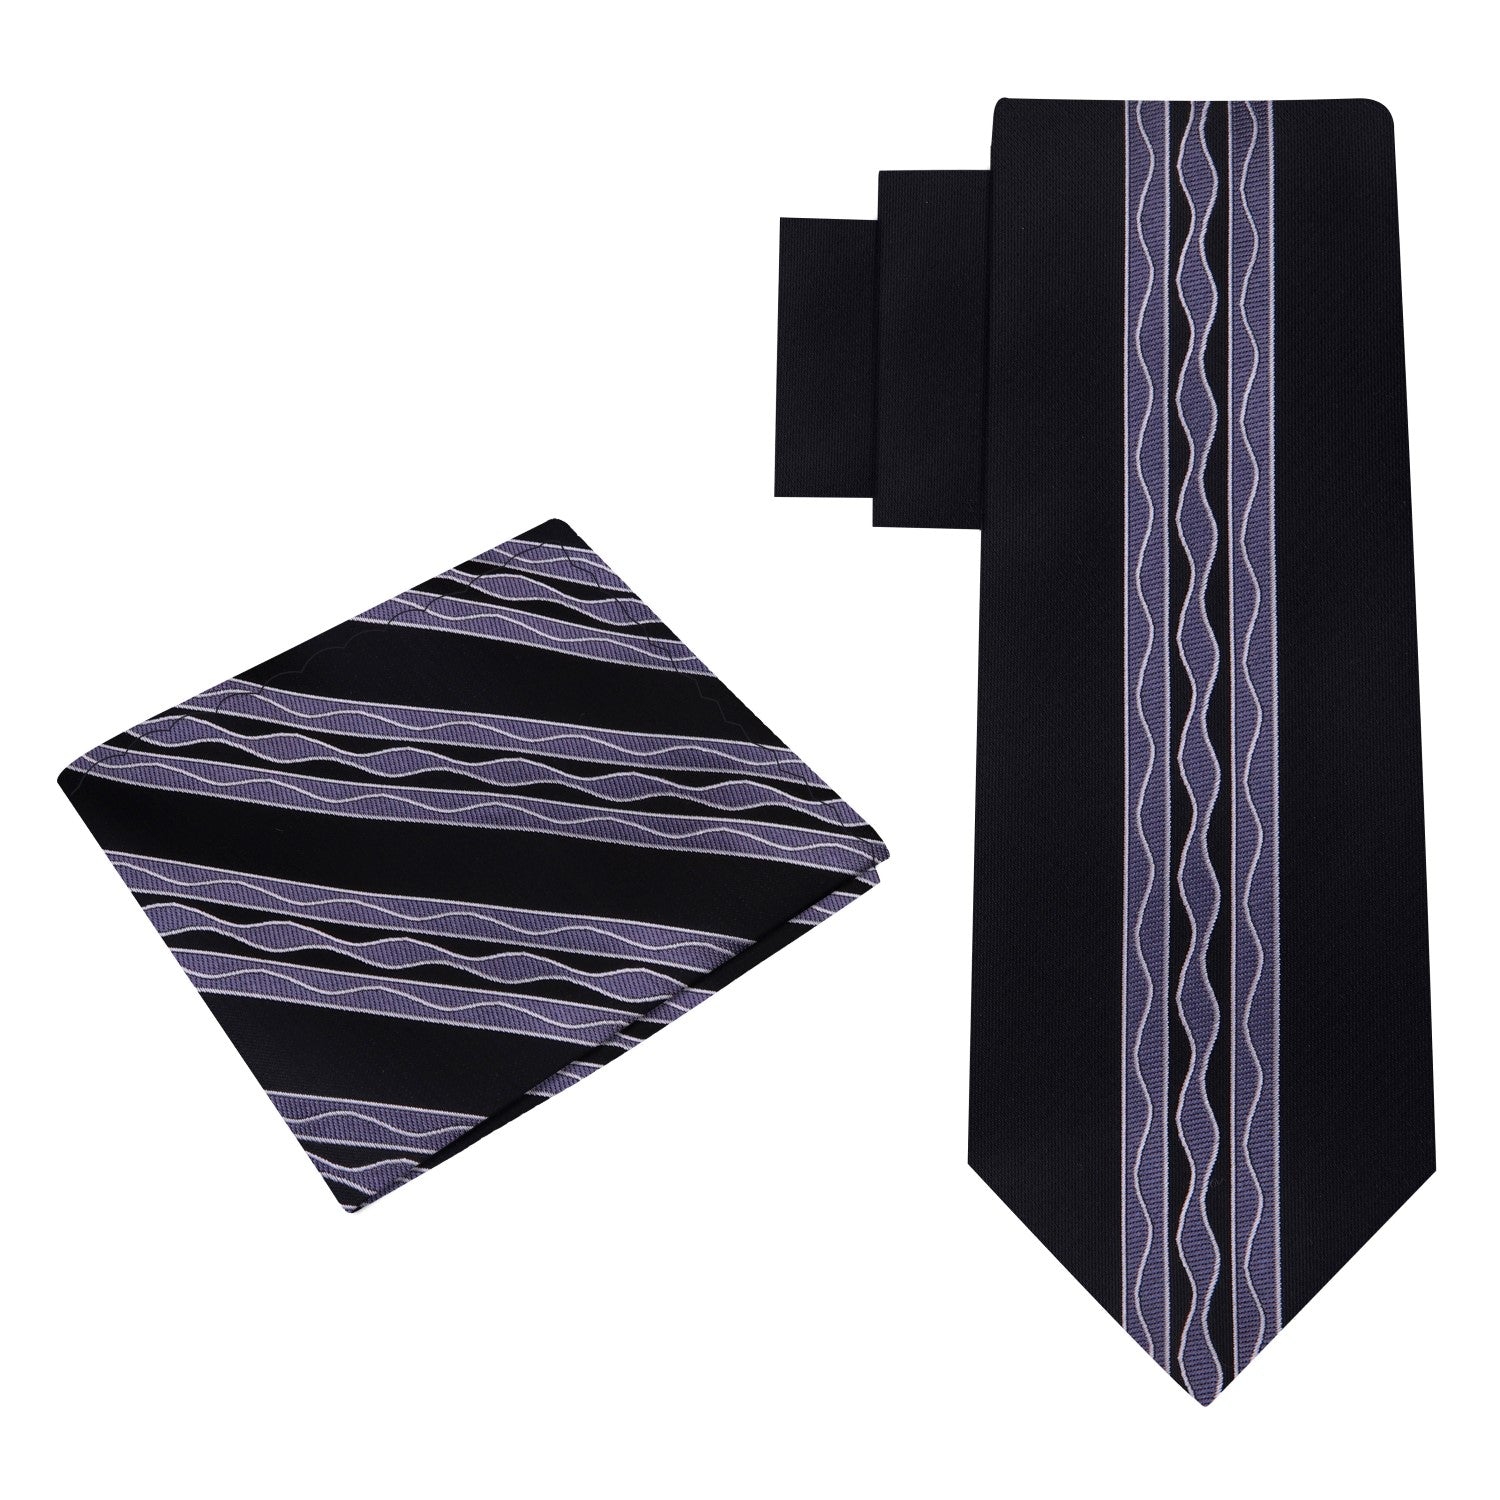 Alt View: Black, Grey Waves Tie and Pocket Square